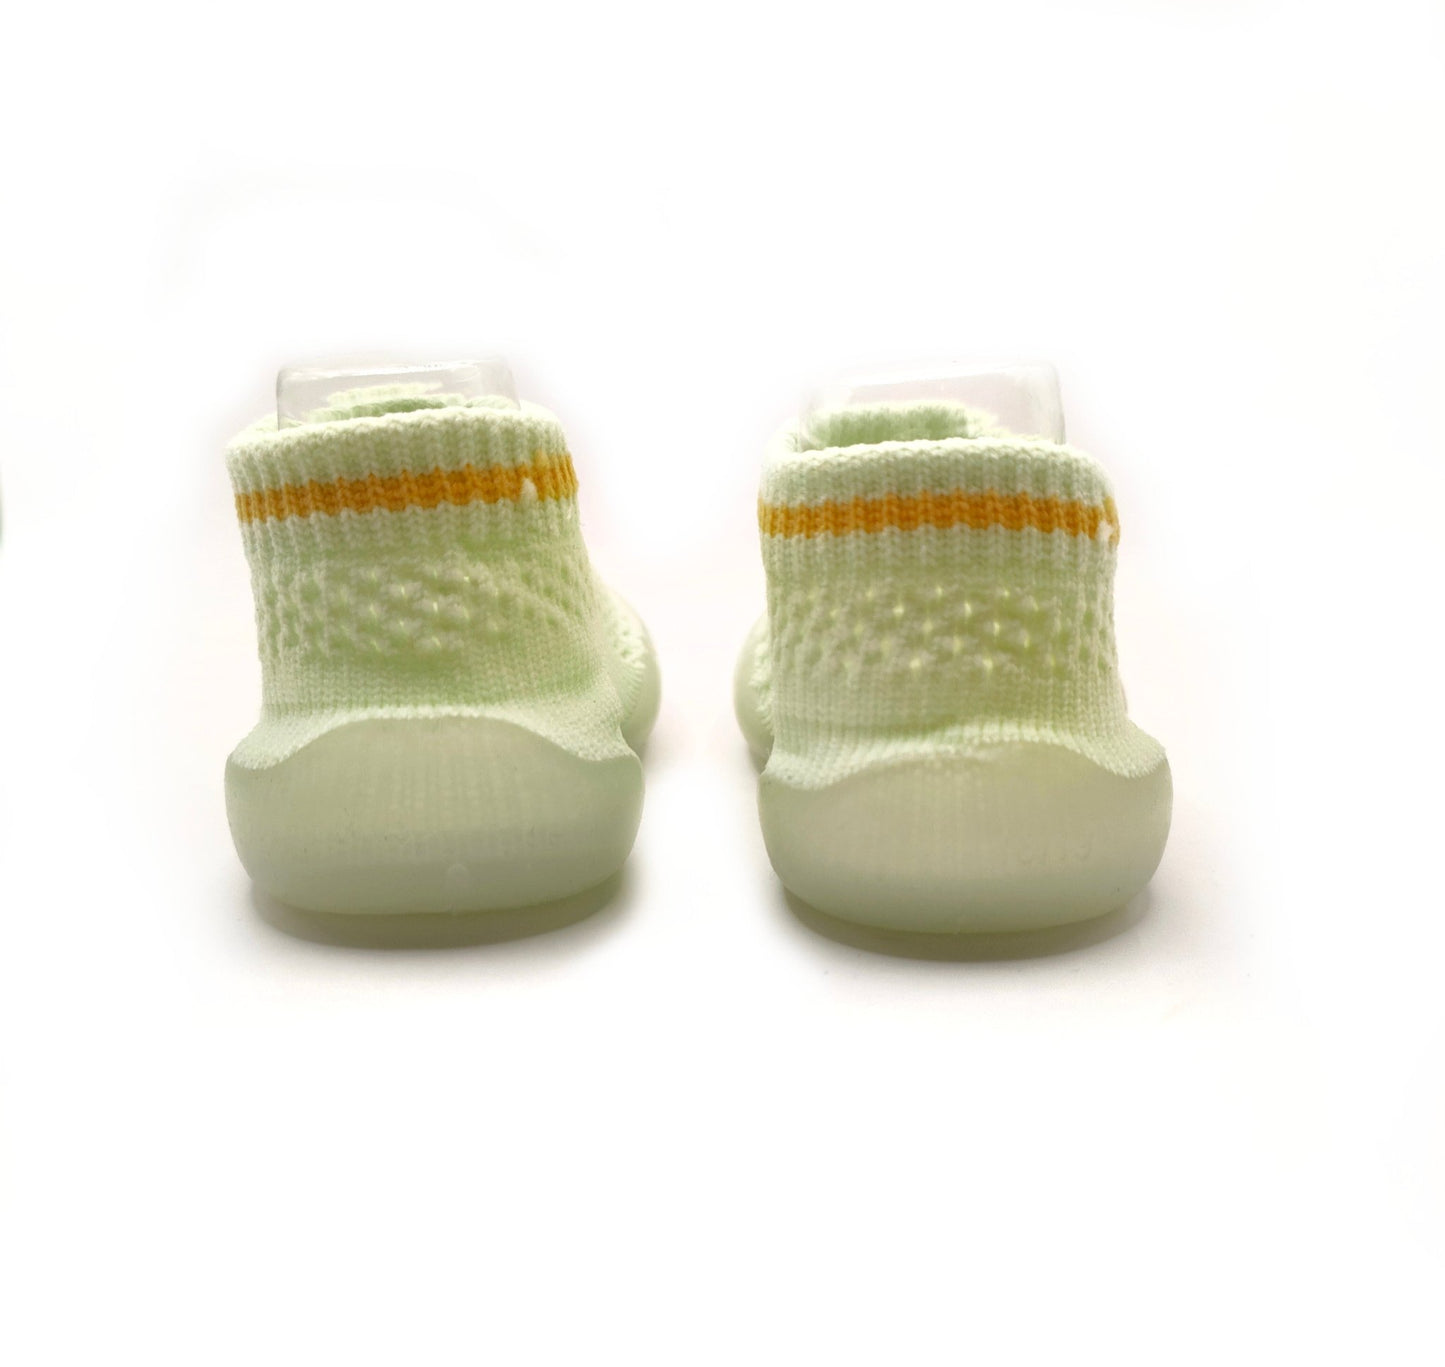 Kool Cucumber by Bearba- Sock Shoes for Babies & Toddlers Sizes- XS,S,M- Flexible Soles, Lightweight, Machine Washable-Light Green - Bearba